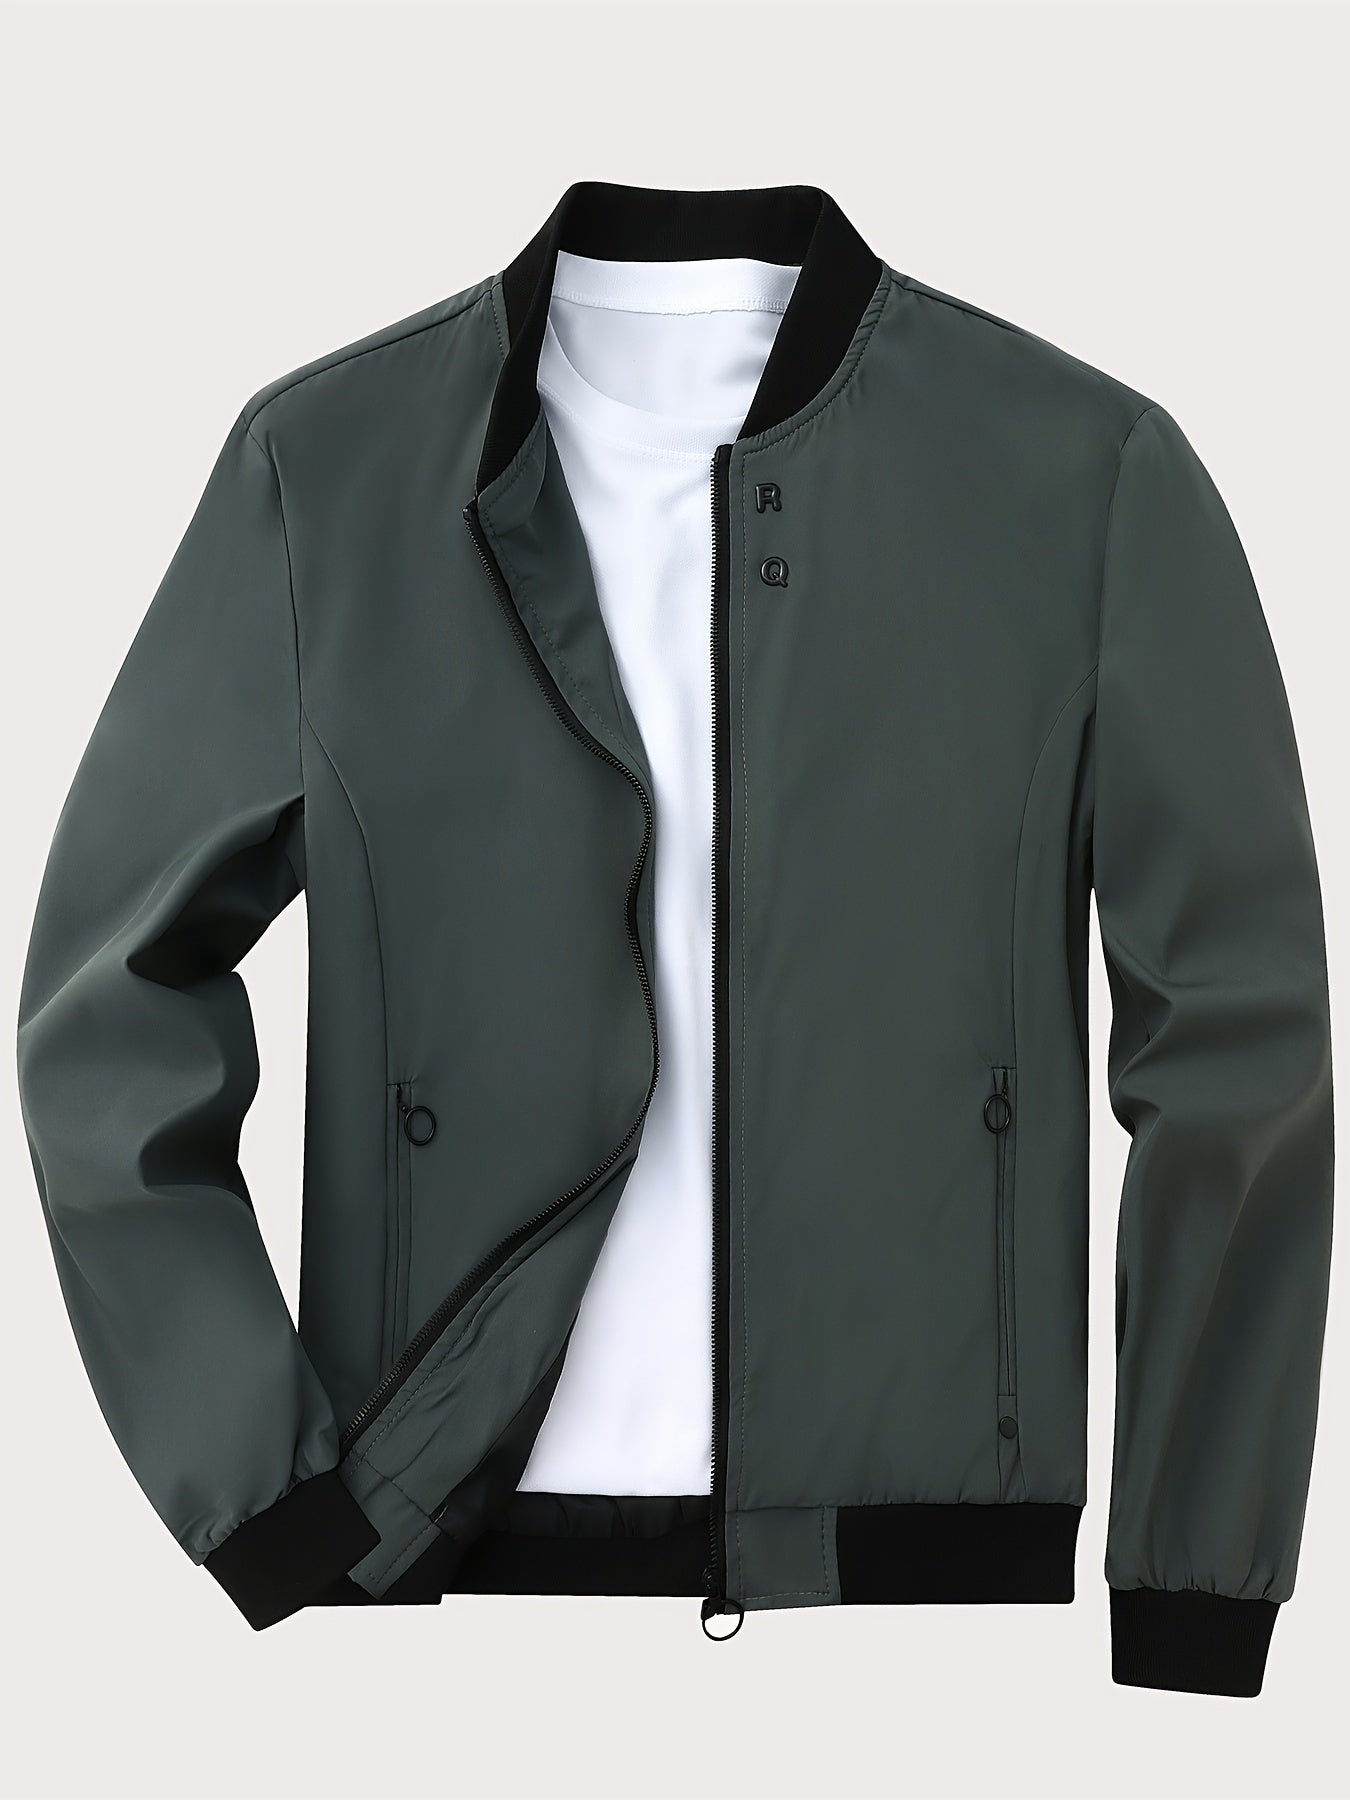 Men's Casual Lightweight Jacket With Zipper Pockets, Simple Bomber Jacket